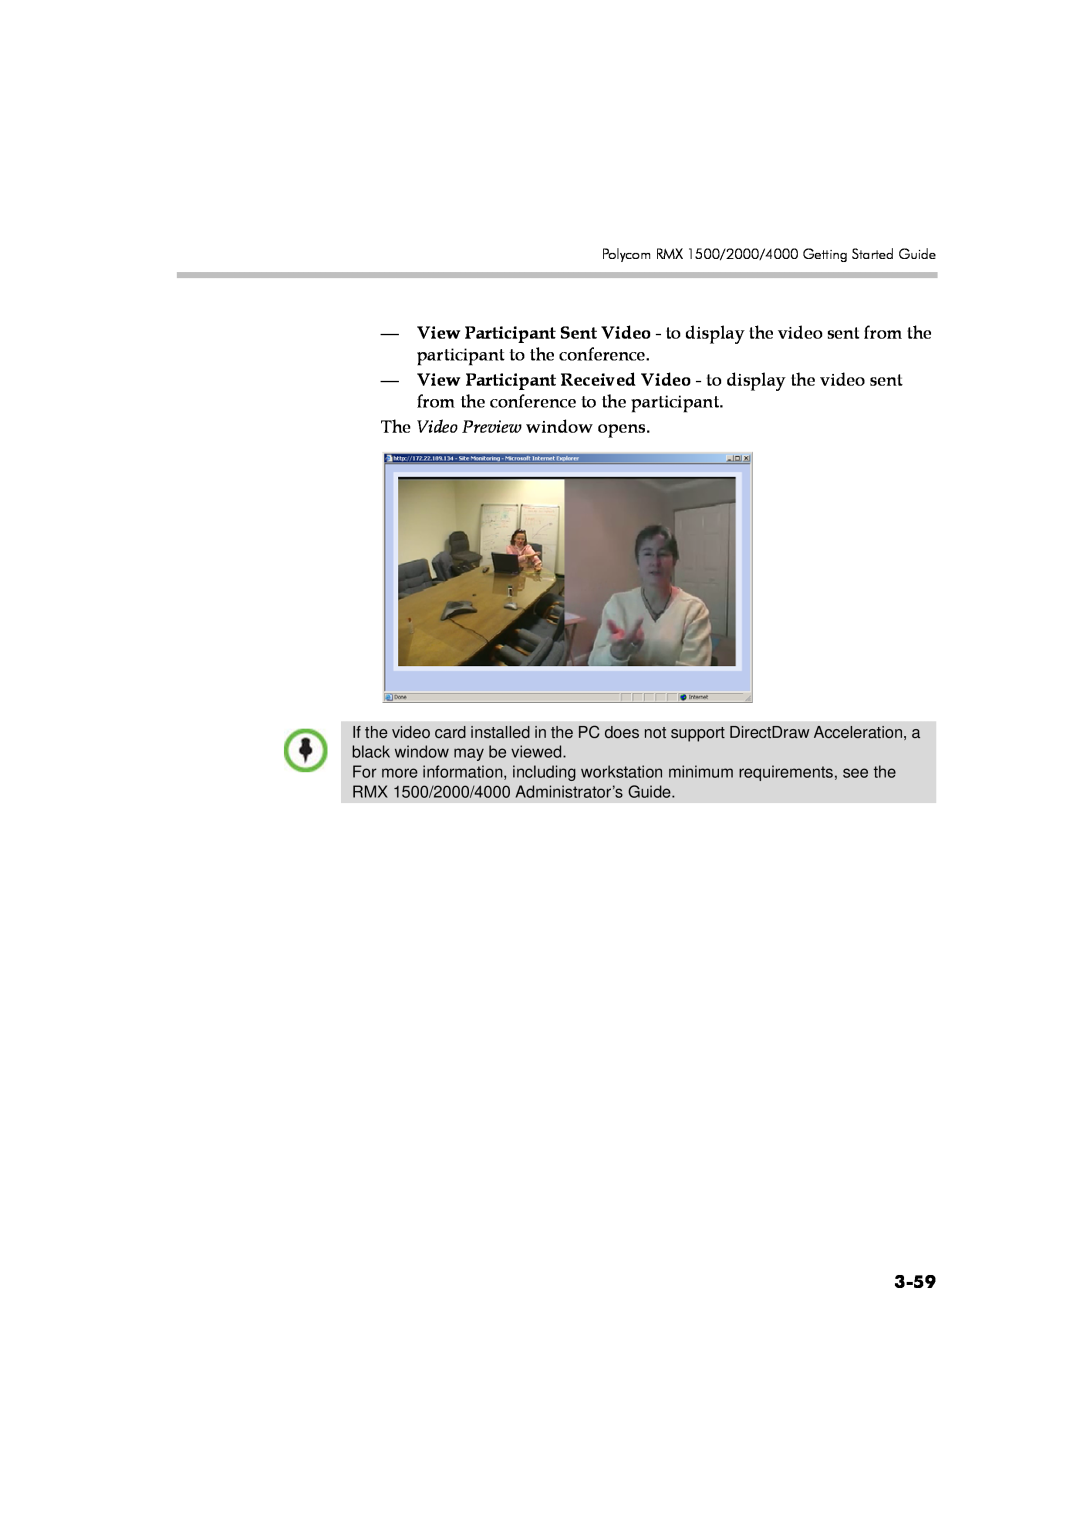 Polycom DOC2560A manual 3-59, The Video Preview window opens 